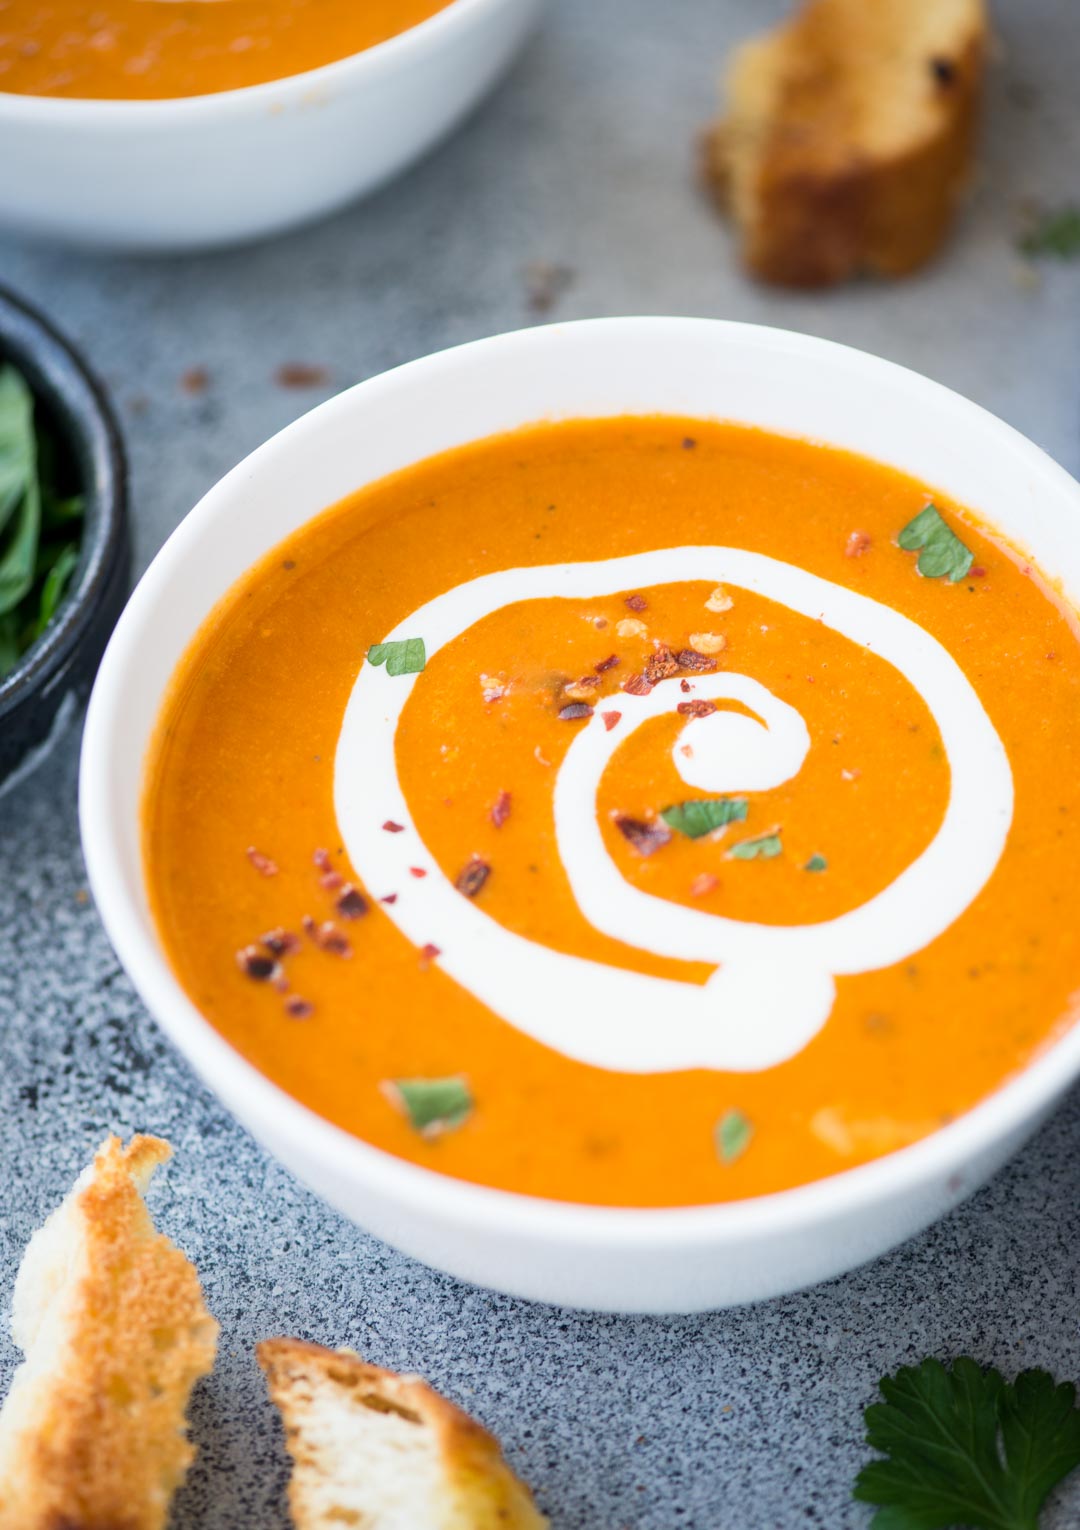 Tomato Bisque with a hint of tartness from the tomatoes, is the perfect soup for cold winter days. It is healthy, gluten-free and easy to make. Serve this with a big slice of crusty garlic cheese toast or grilled cheese.